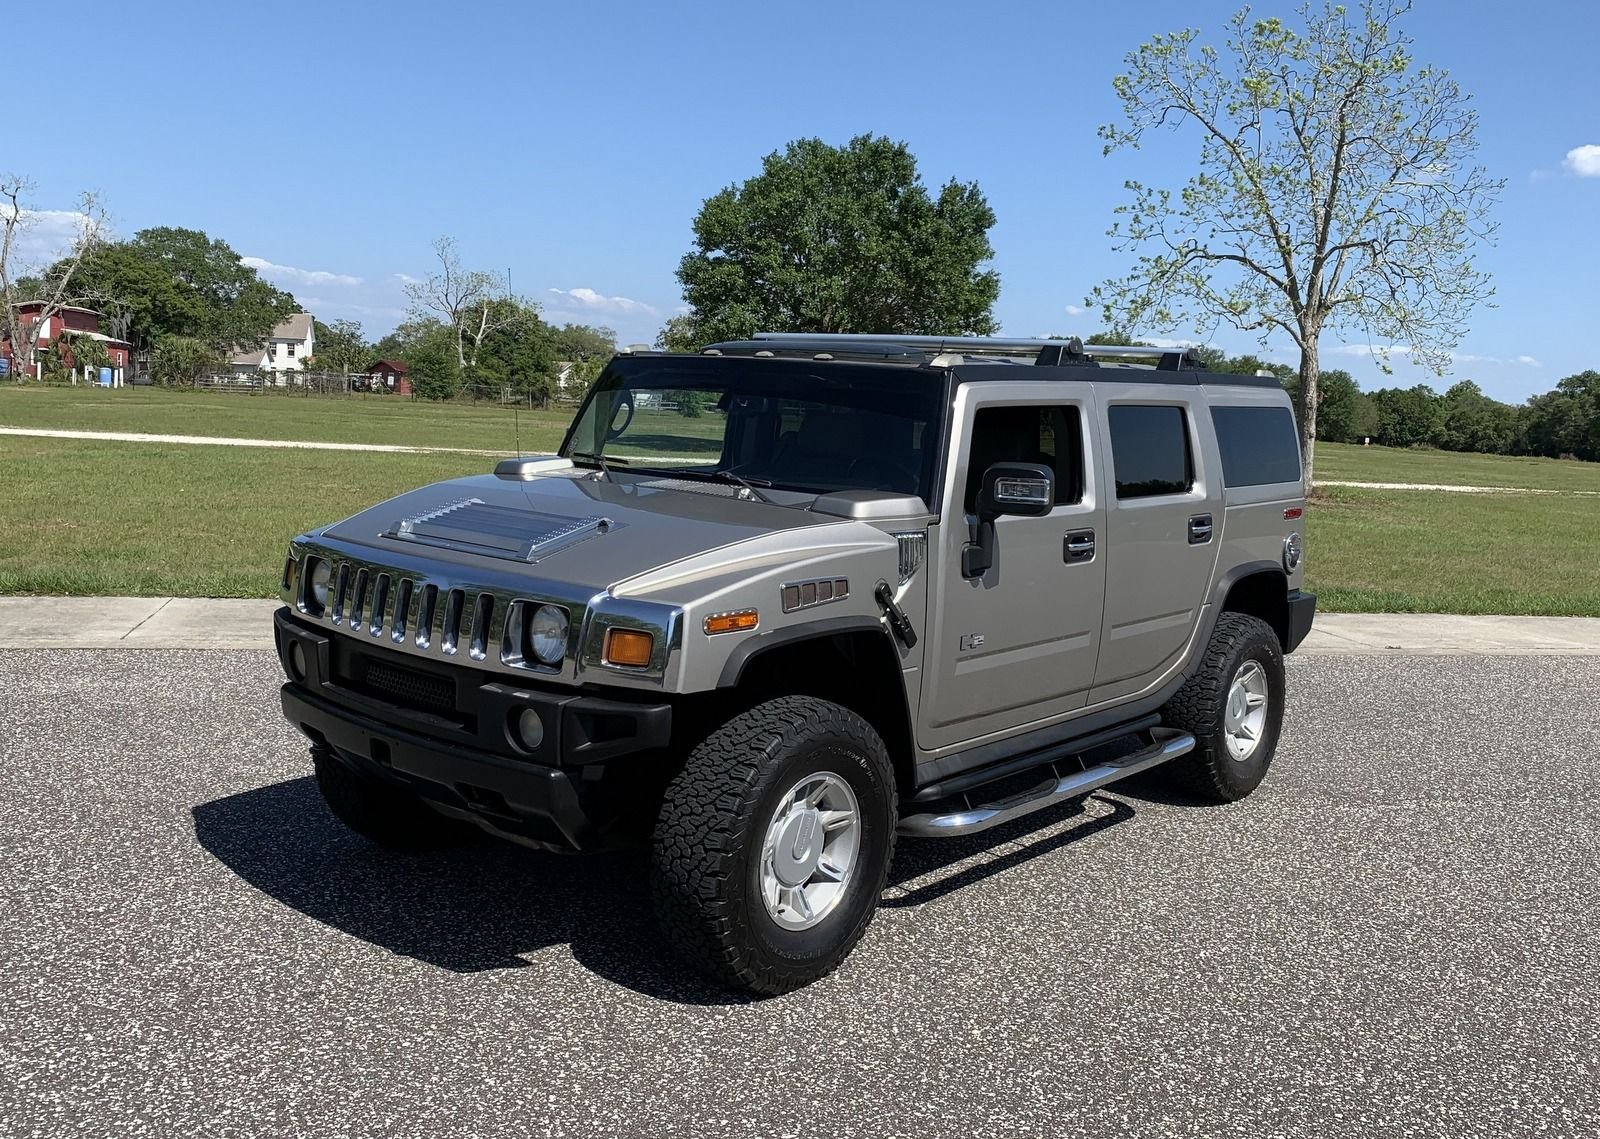 2004 Hummer H2 | PJ's Auto World Classic Cars for Sale